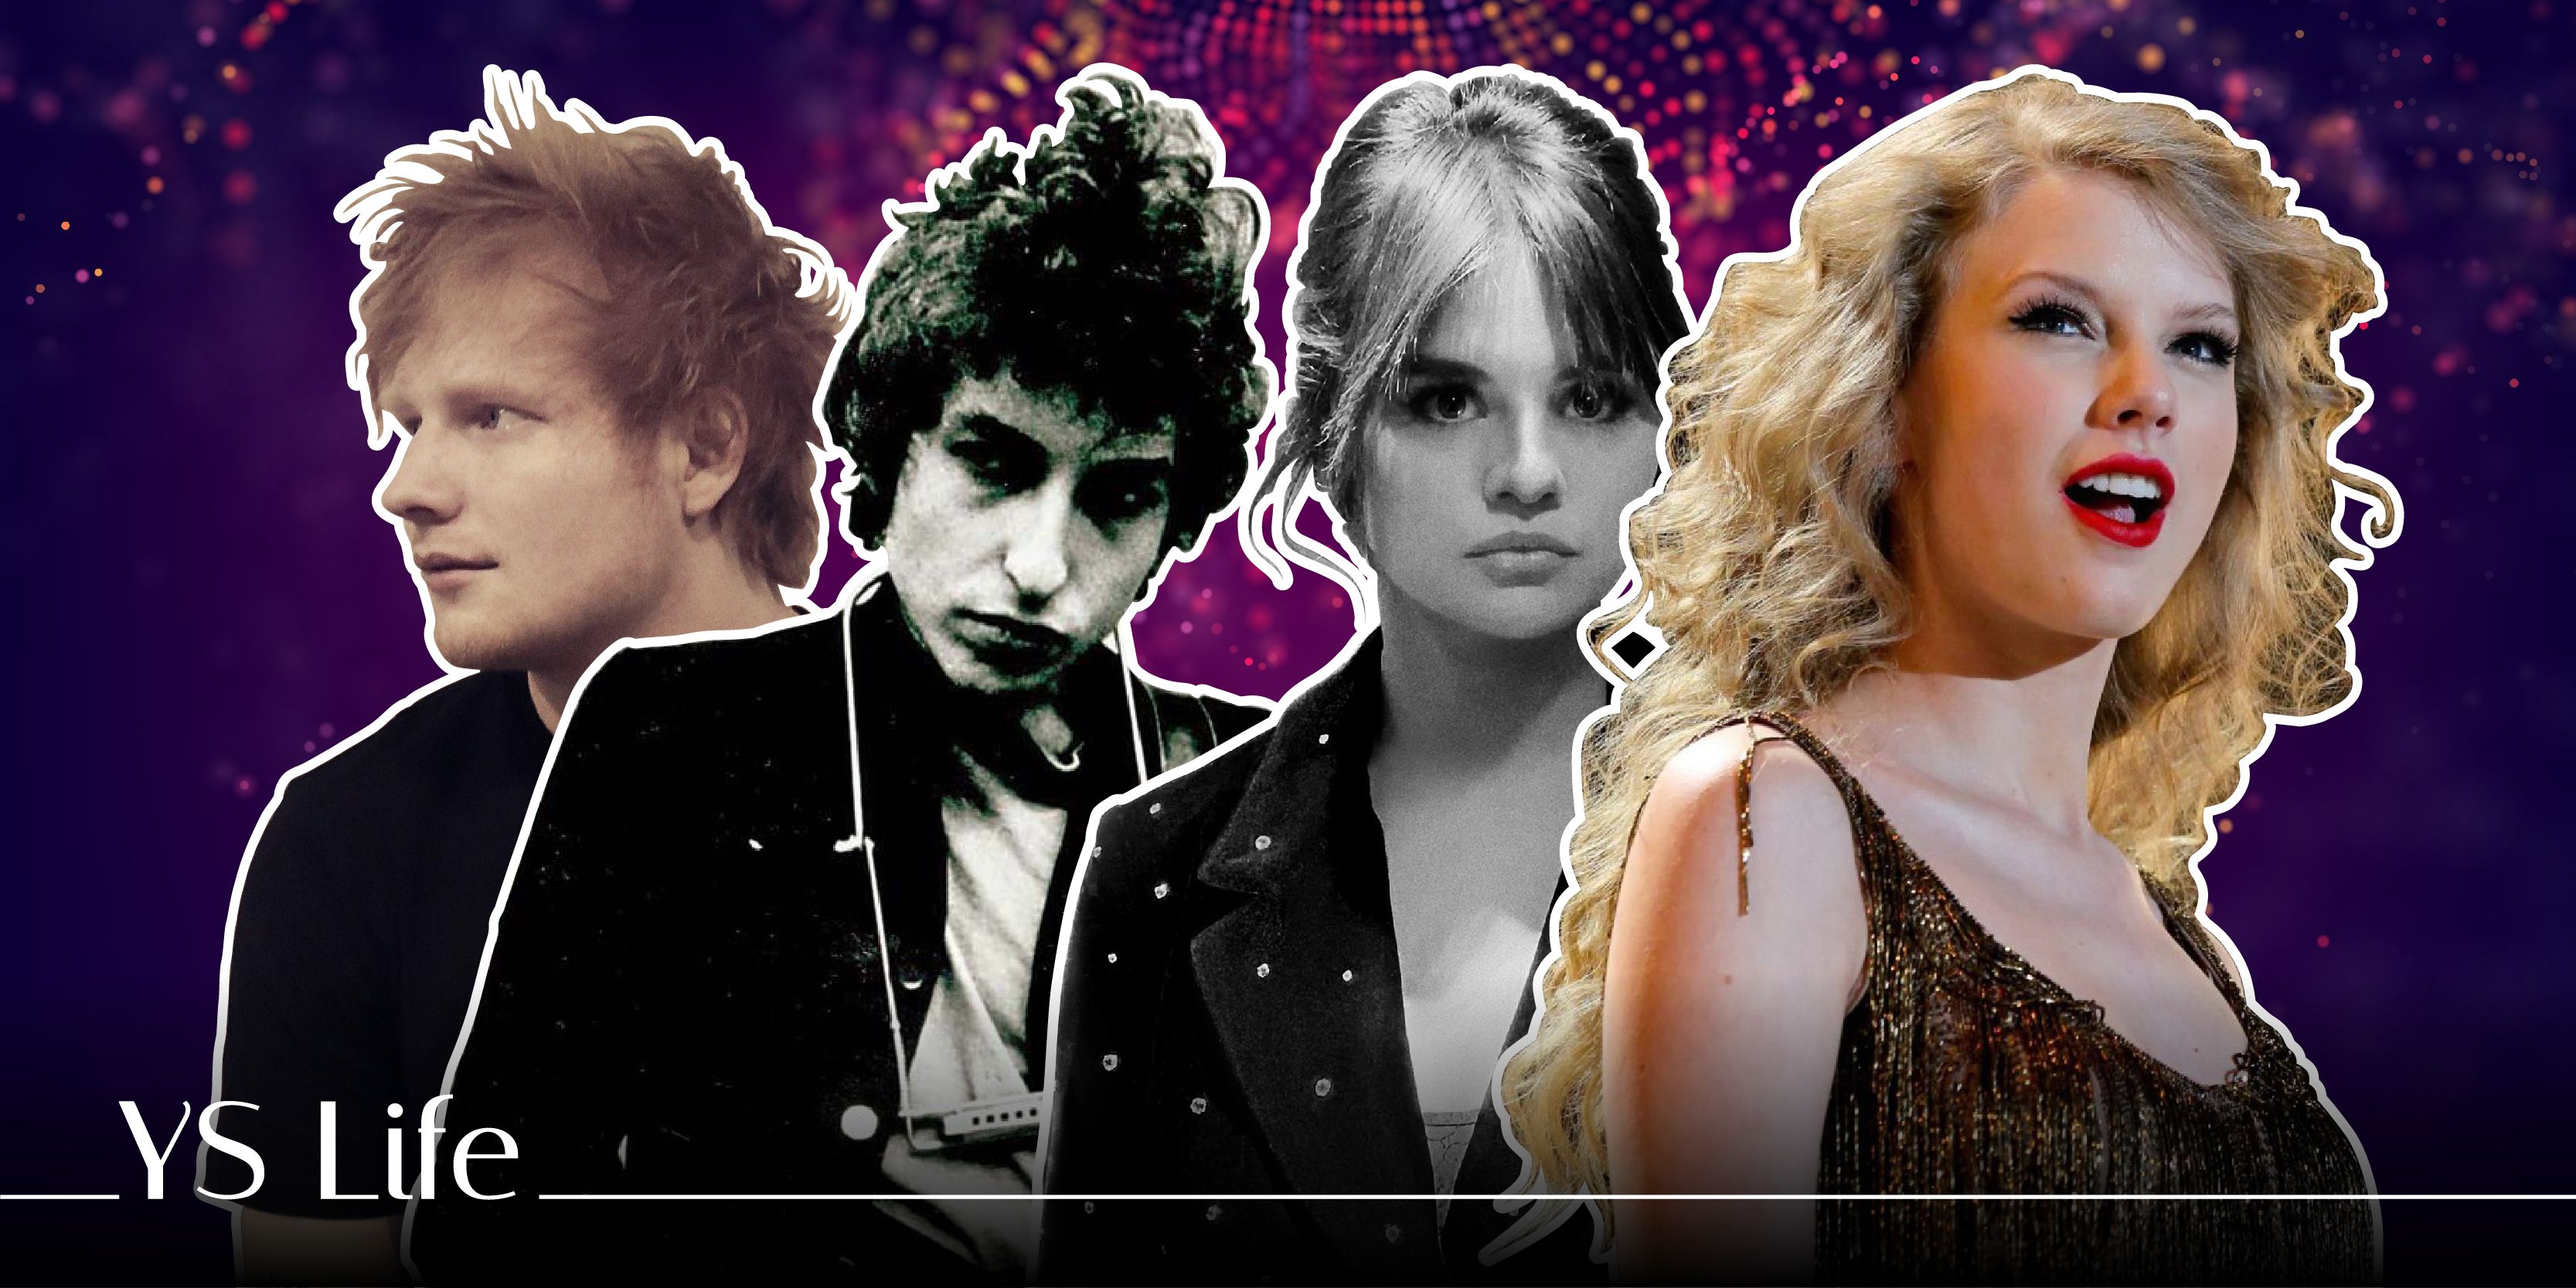 Off the charts: Music documentaries that offer a look at the artist beyond the fame